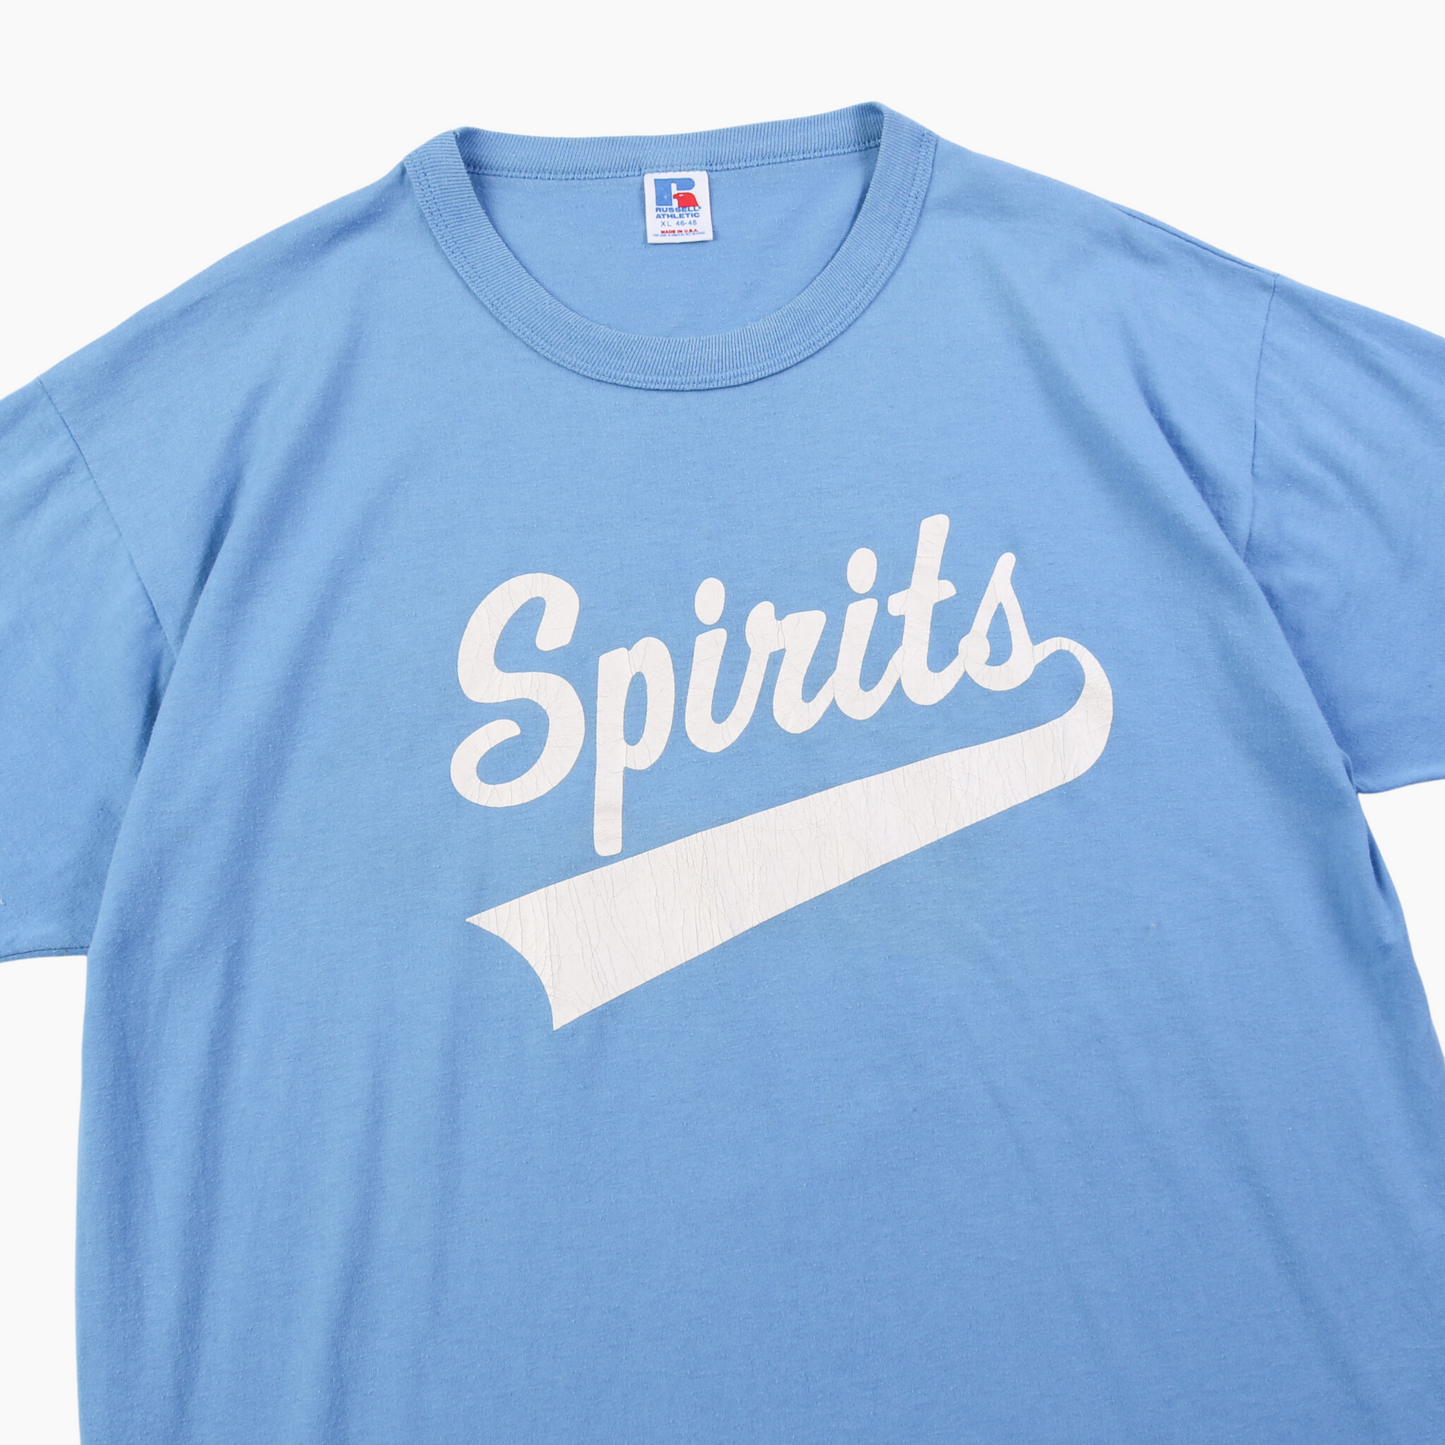 Vintage '80s Russell Spirits' T-Shirt - American Madness